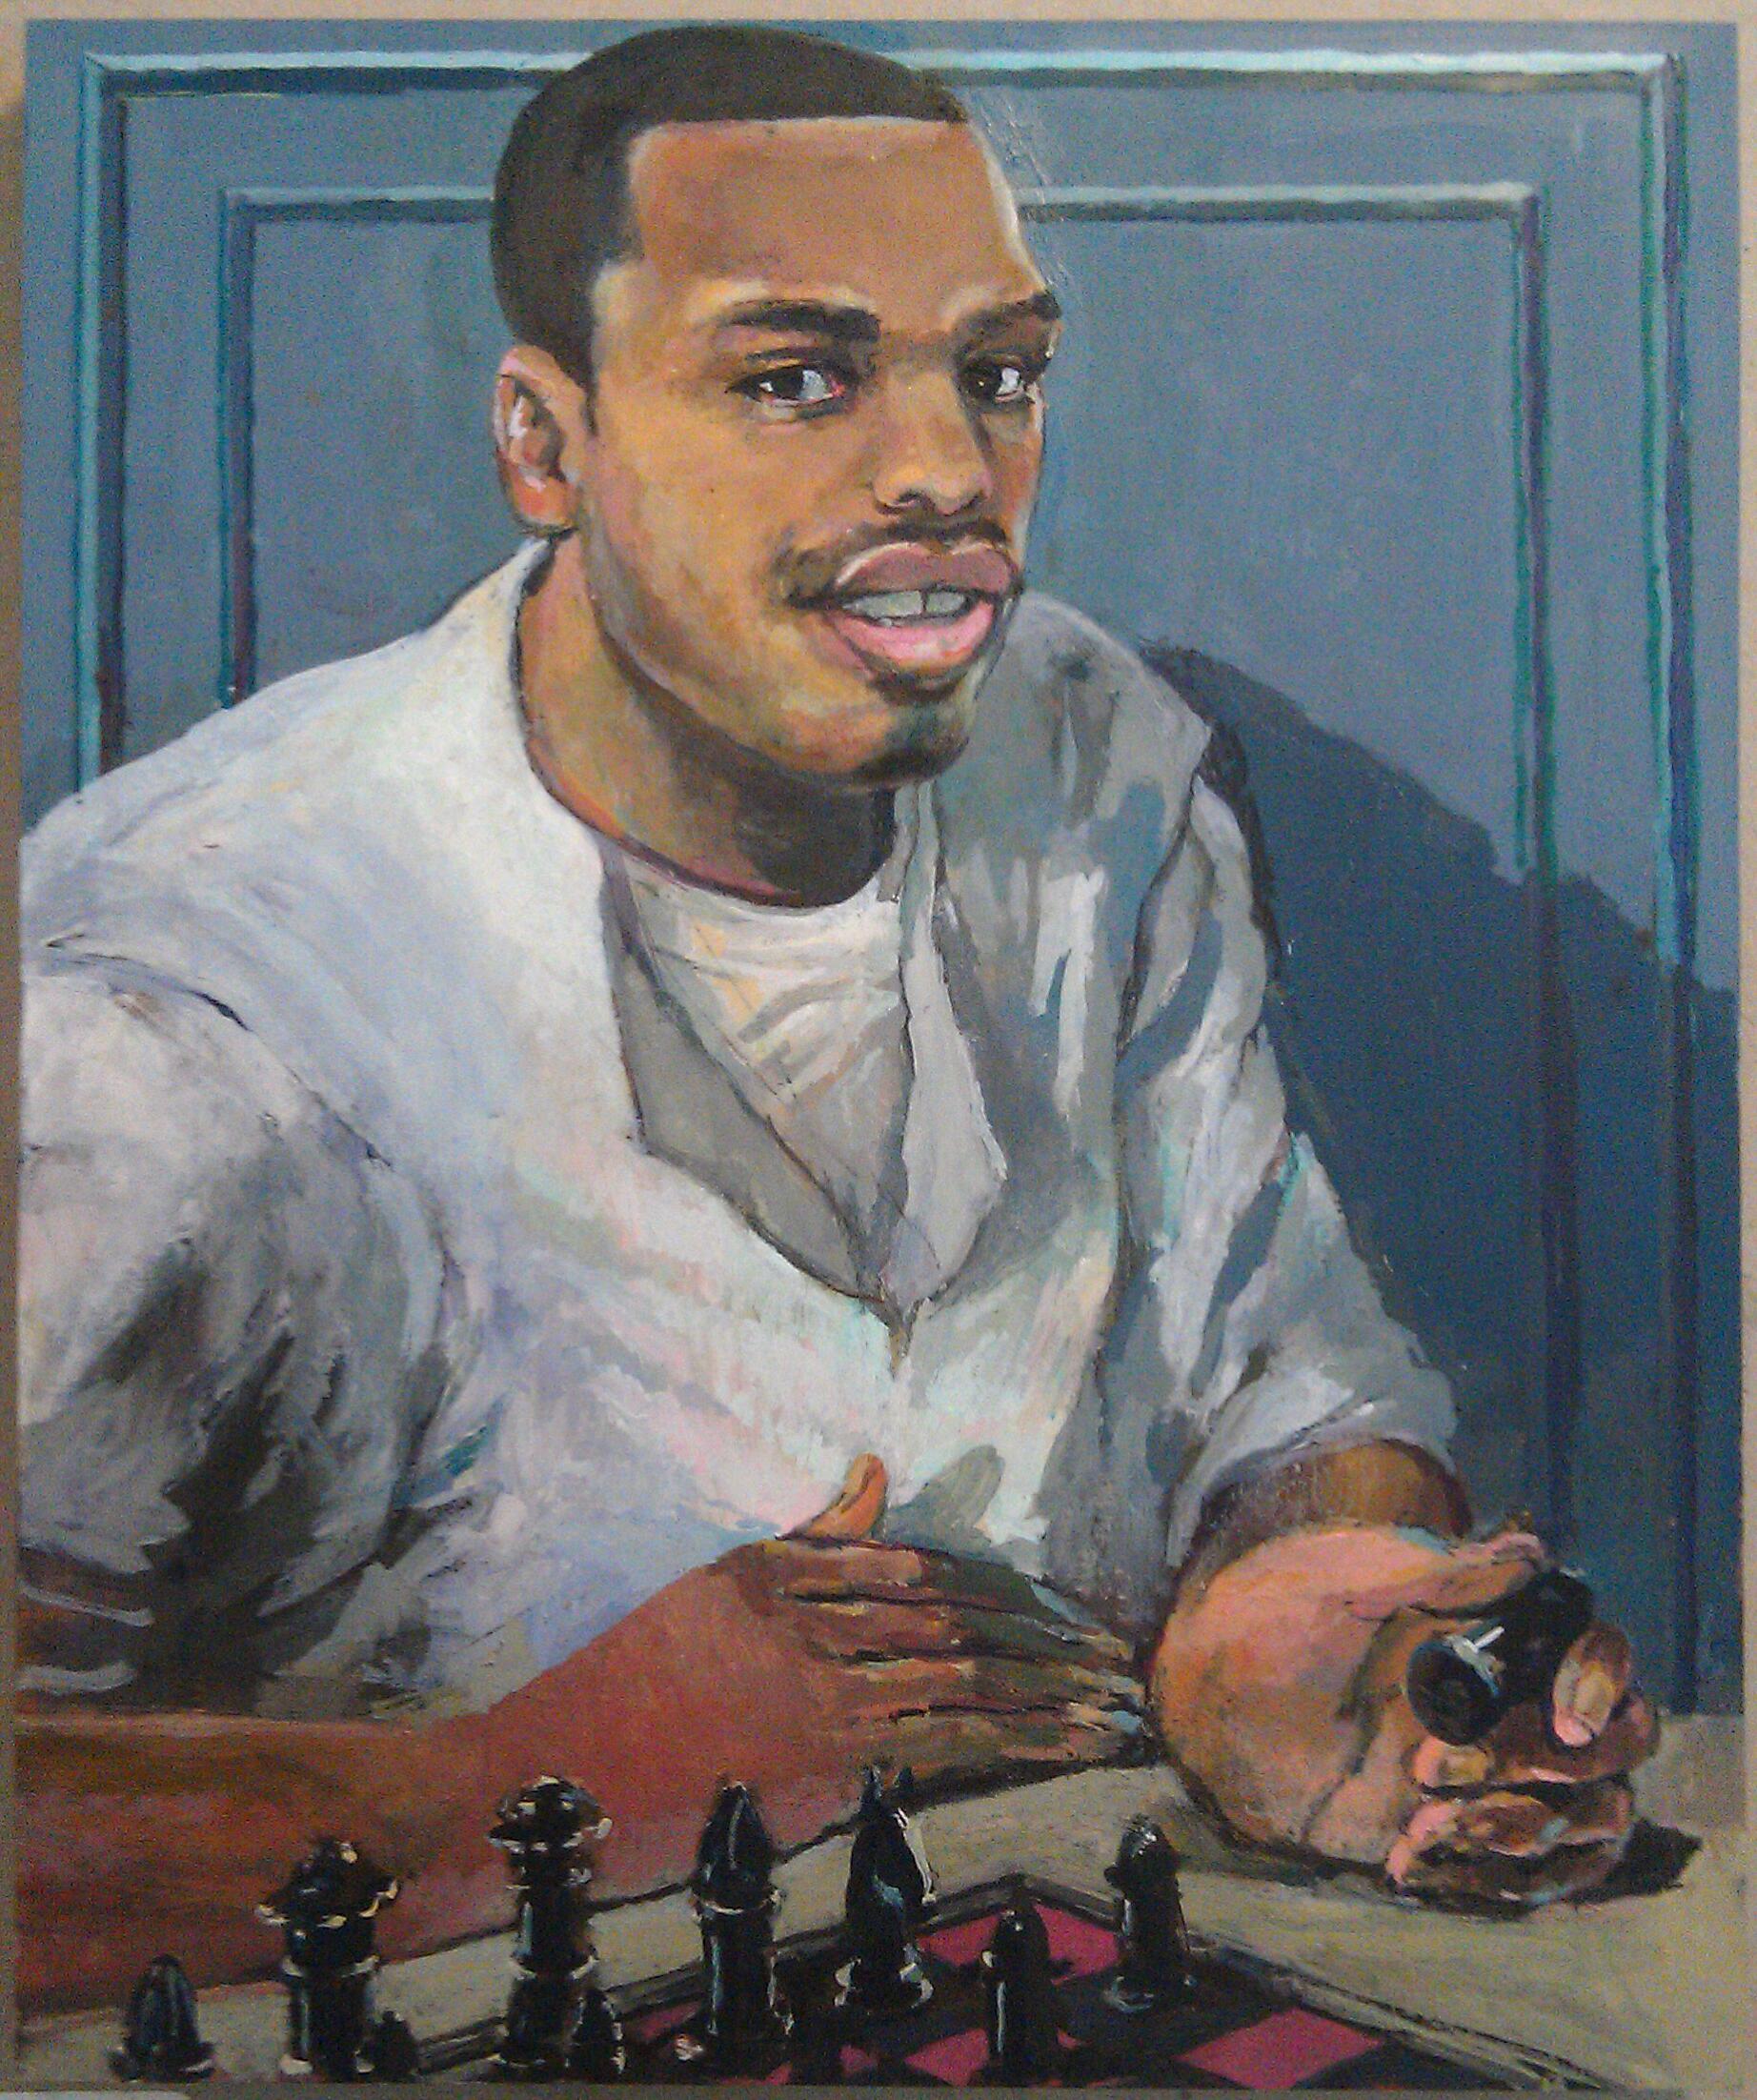 A painting of Christopher Young, a Black man with short hair, a thin mustache, wearing prison whites. He is seated at a chess table, holding a rook.